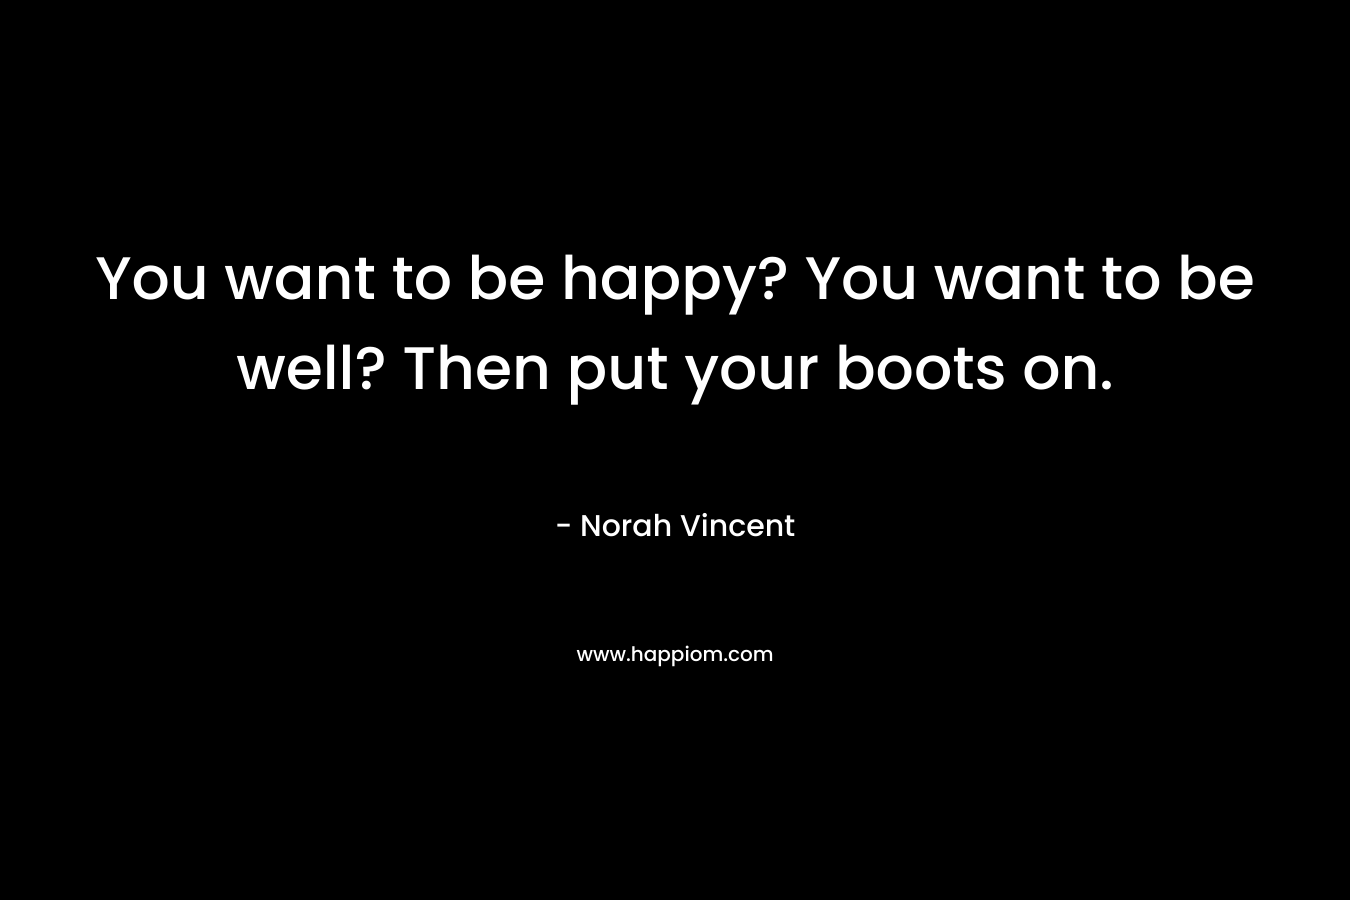 You want to be happy? You want to be well? Then put your boots on.